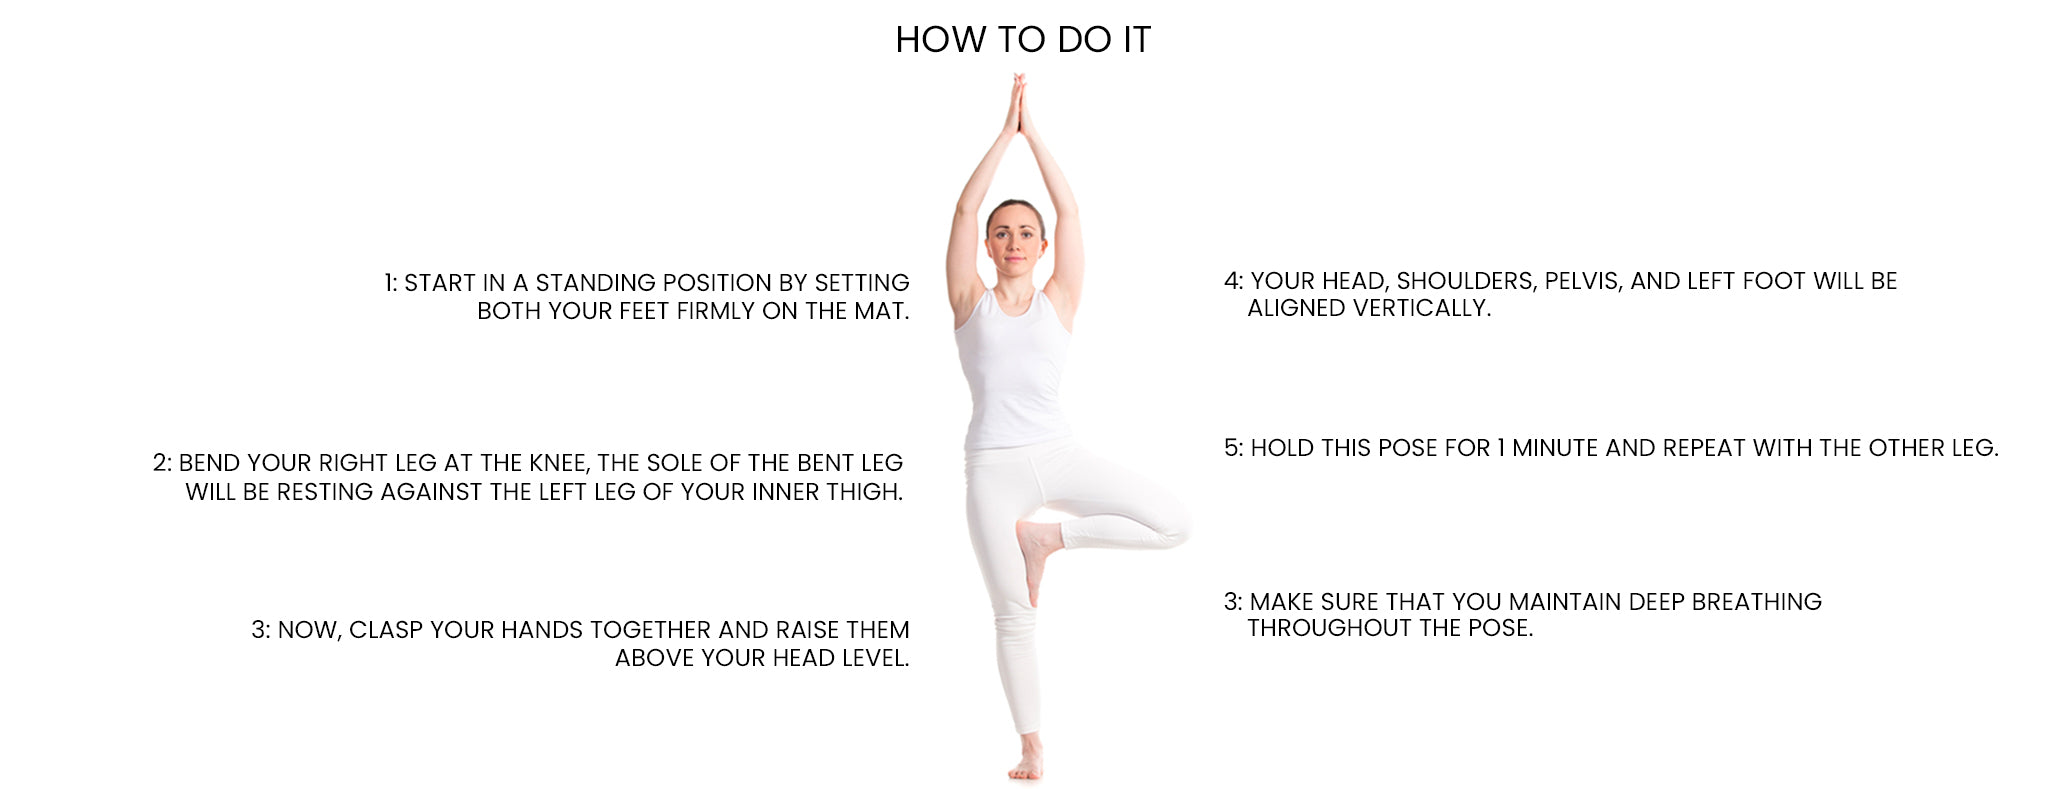 6 Anti-Aging Yoga Poses to Keep You Young | Best Health Canada